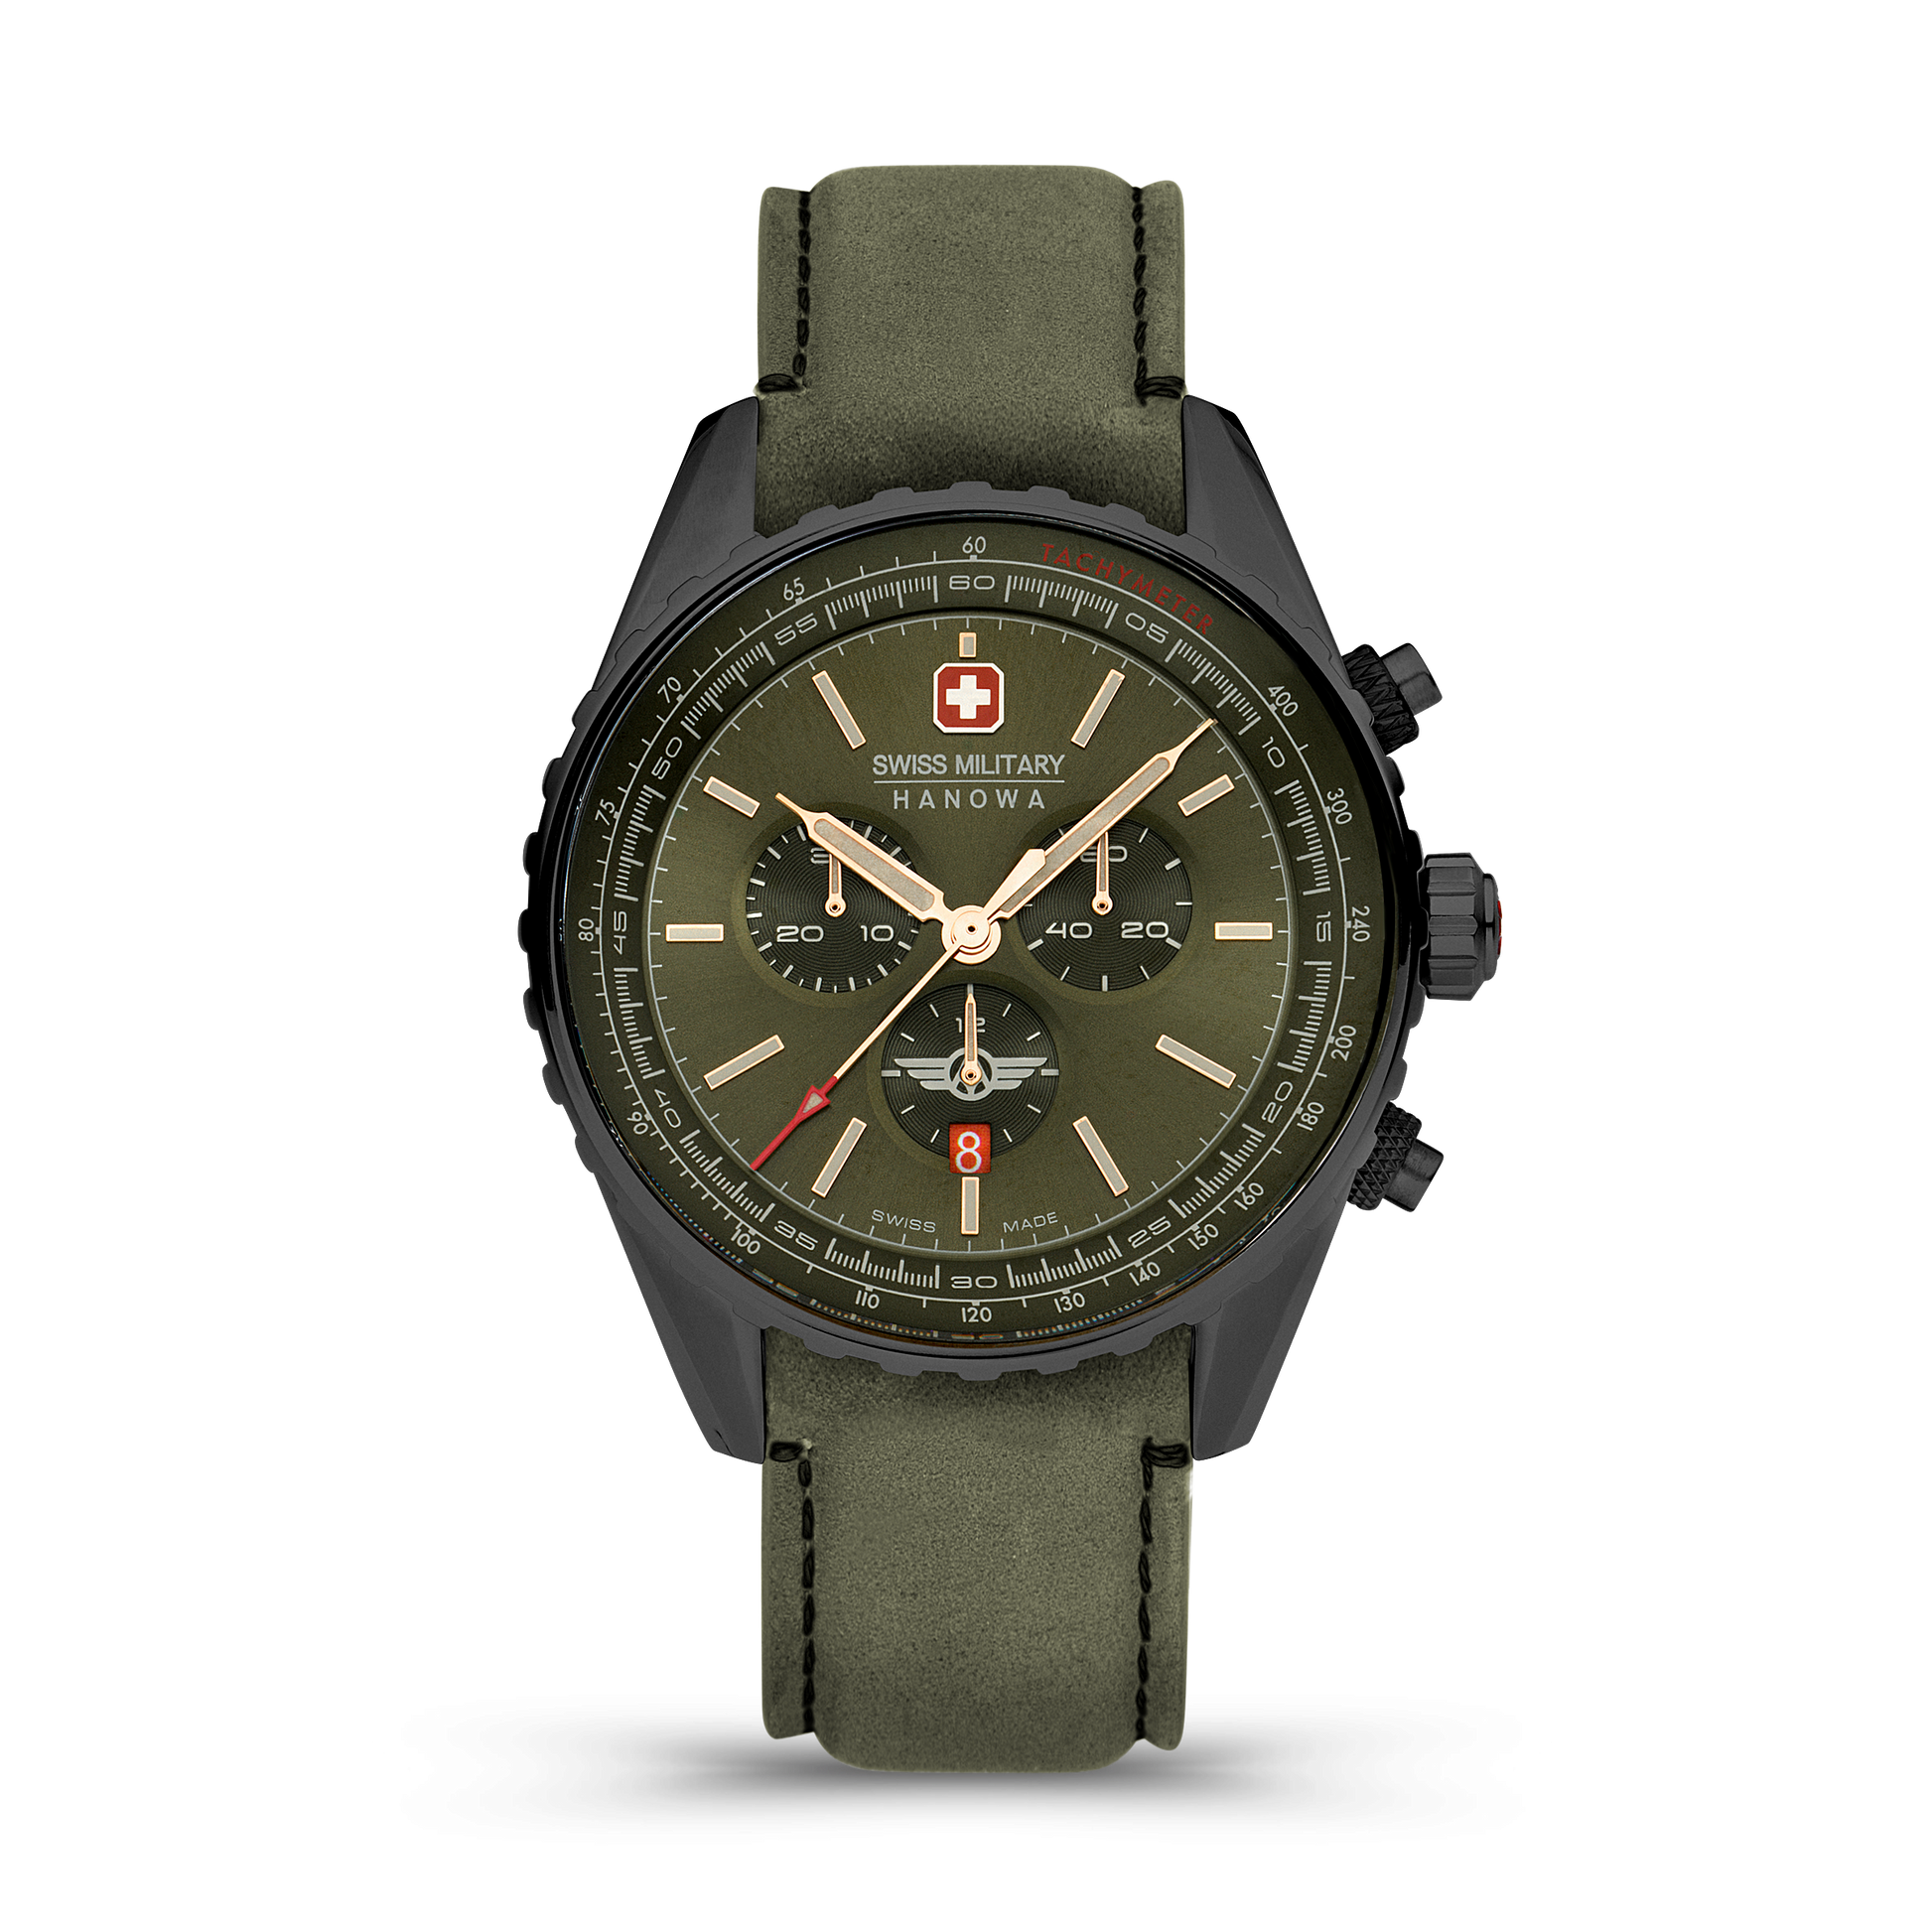 Swiss Military Hanowa Afterburn Chrono. Stainless steel case in gunmetal PDV plating, olive green dial and a genuine olive green Italian leather strap. Front image.